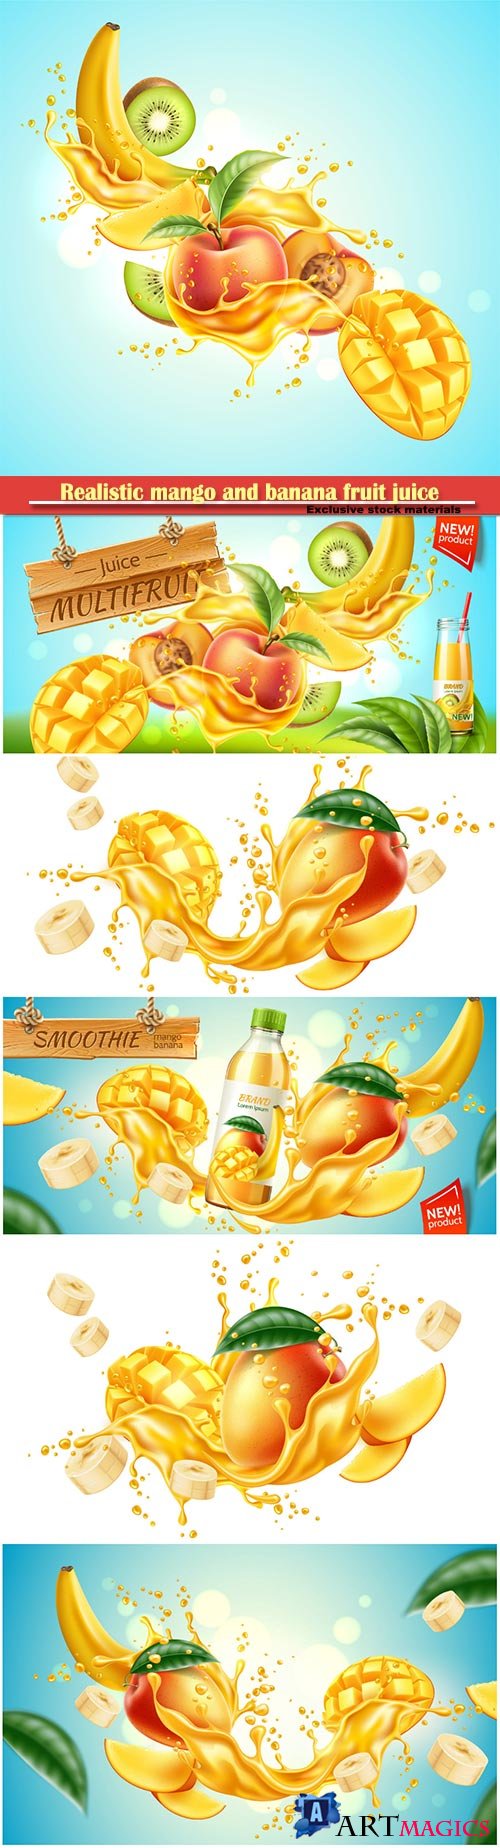 Realistic mango and banana fruit juice advertising , vector product package design